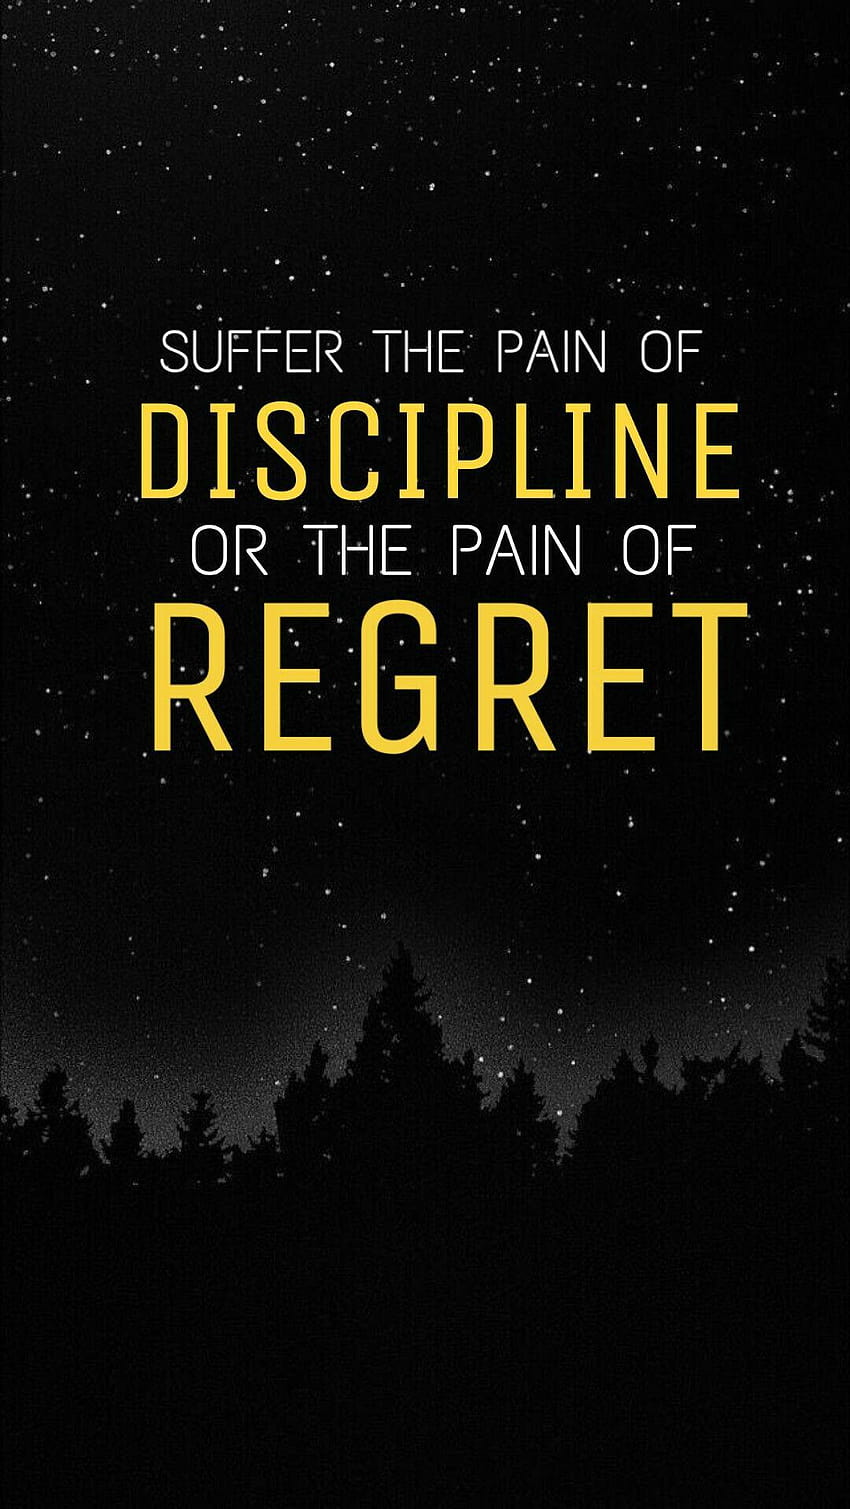 Pin on My Pins, discipline quote phone HD phone wallpaper